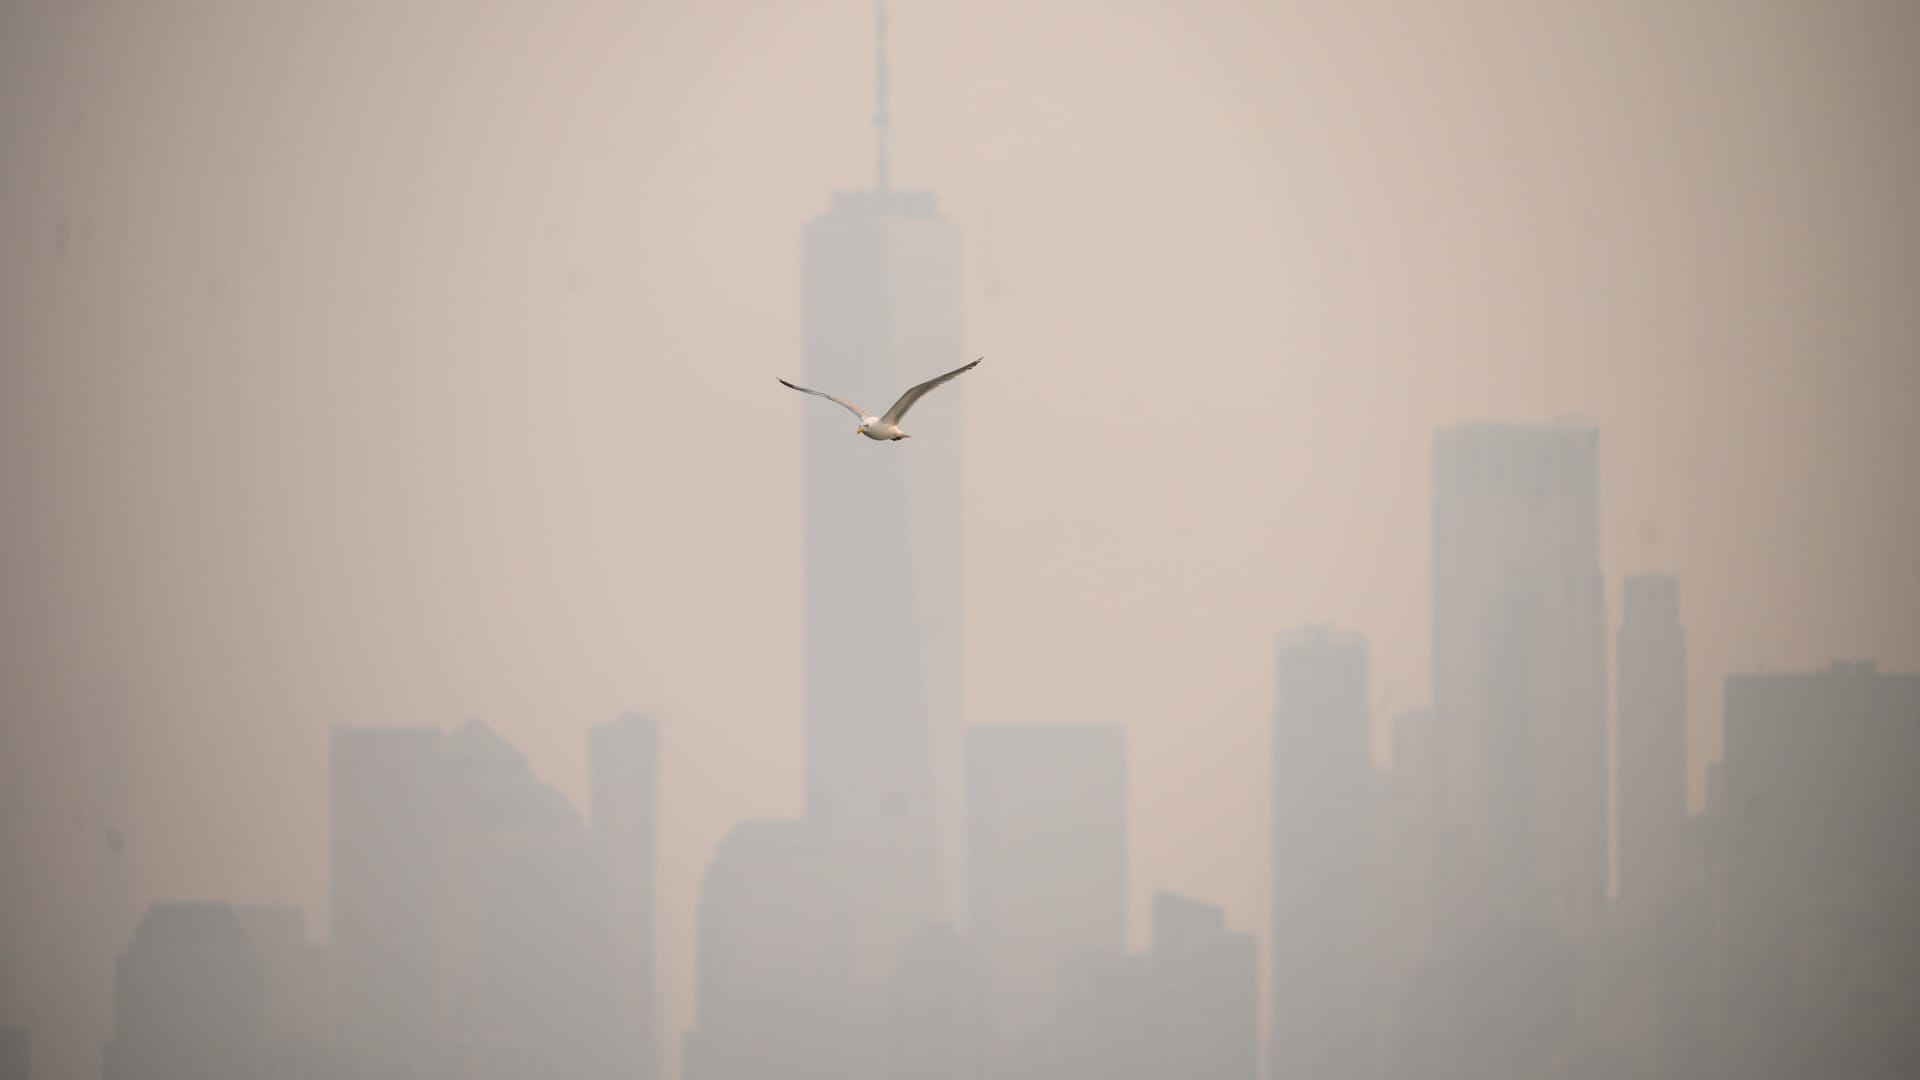 New York-area flights delayed as Canada wildfire smoke cuts visibility